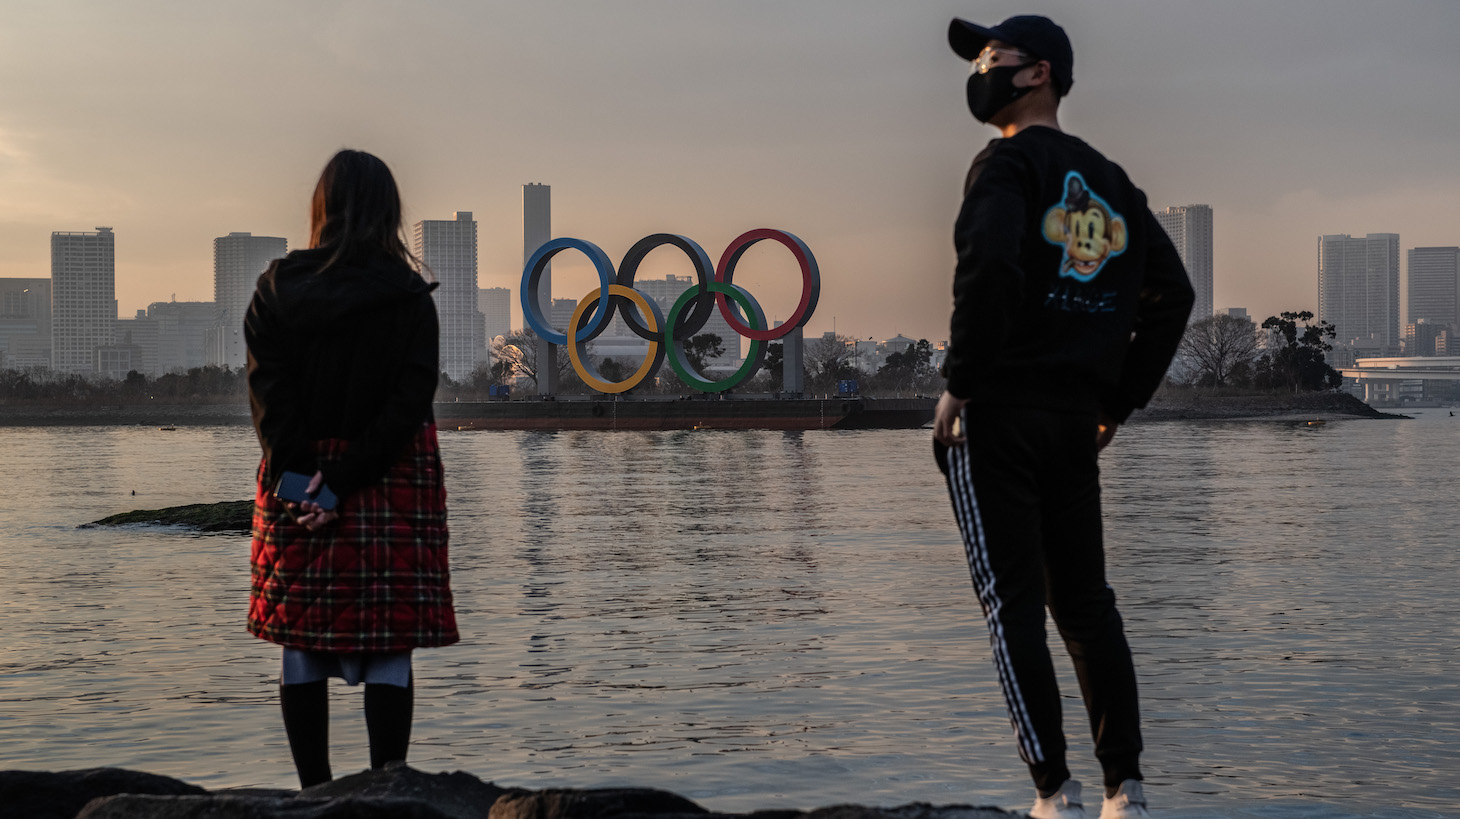 TOKYO, JAPAN - JANUARY 22: A woman and a man wearing a face mask view the Olympic Rings on January 22, 2021 in Tokyo, Japan. With just six months to go until the start of the Games, it has been reported that the Japanese authorities have privately concluded that the Olympics could not proceed due to the ongoing Covid-19 coronavirus pandemic. Spokesmen from the IOC and Japanese government have since rejected the report. (Photo by Carl Court/Getty Images)